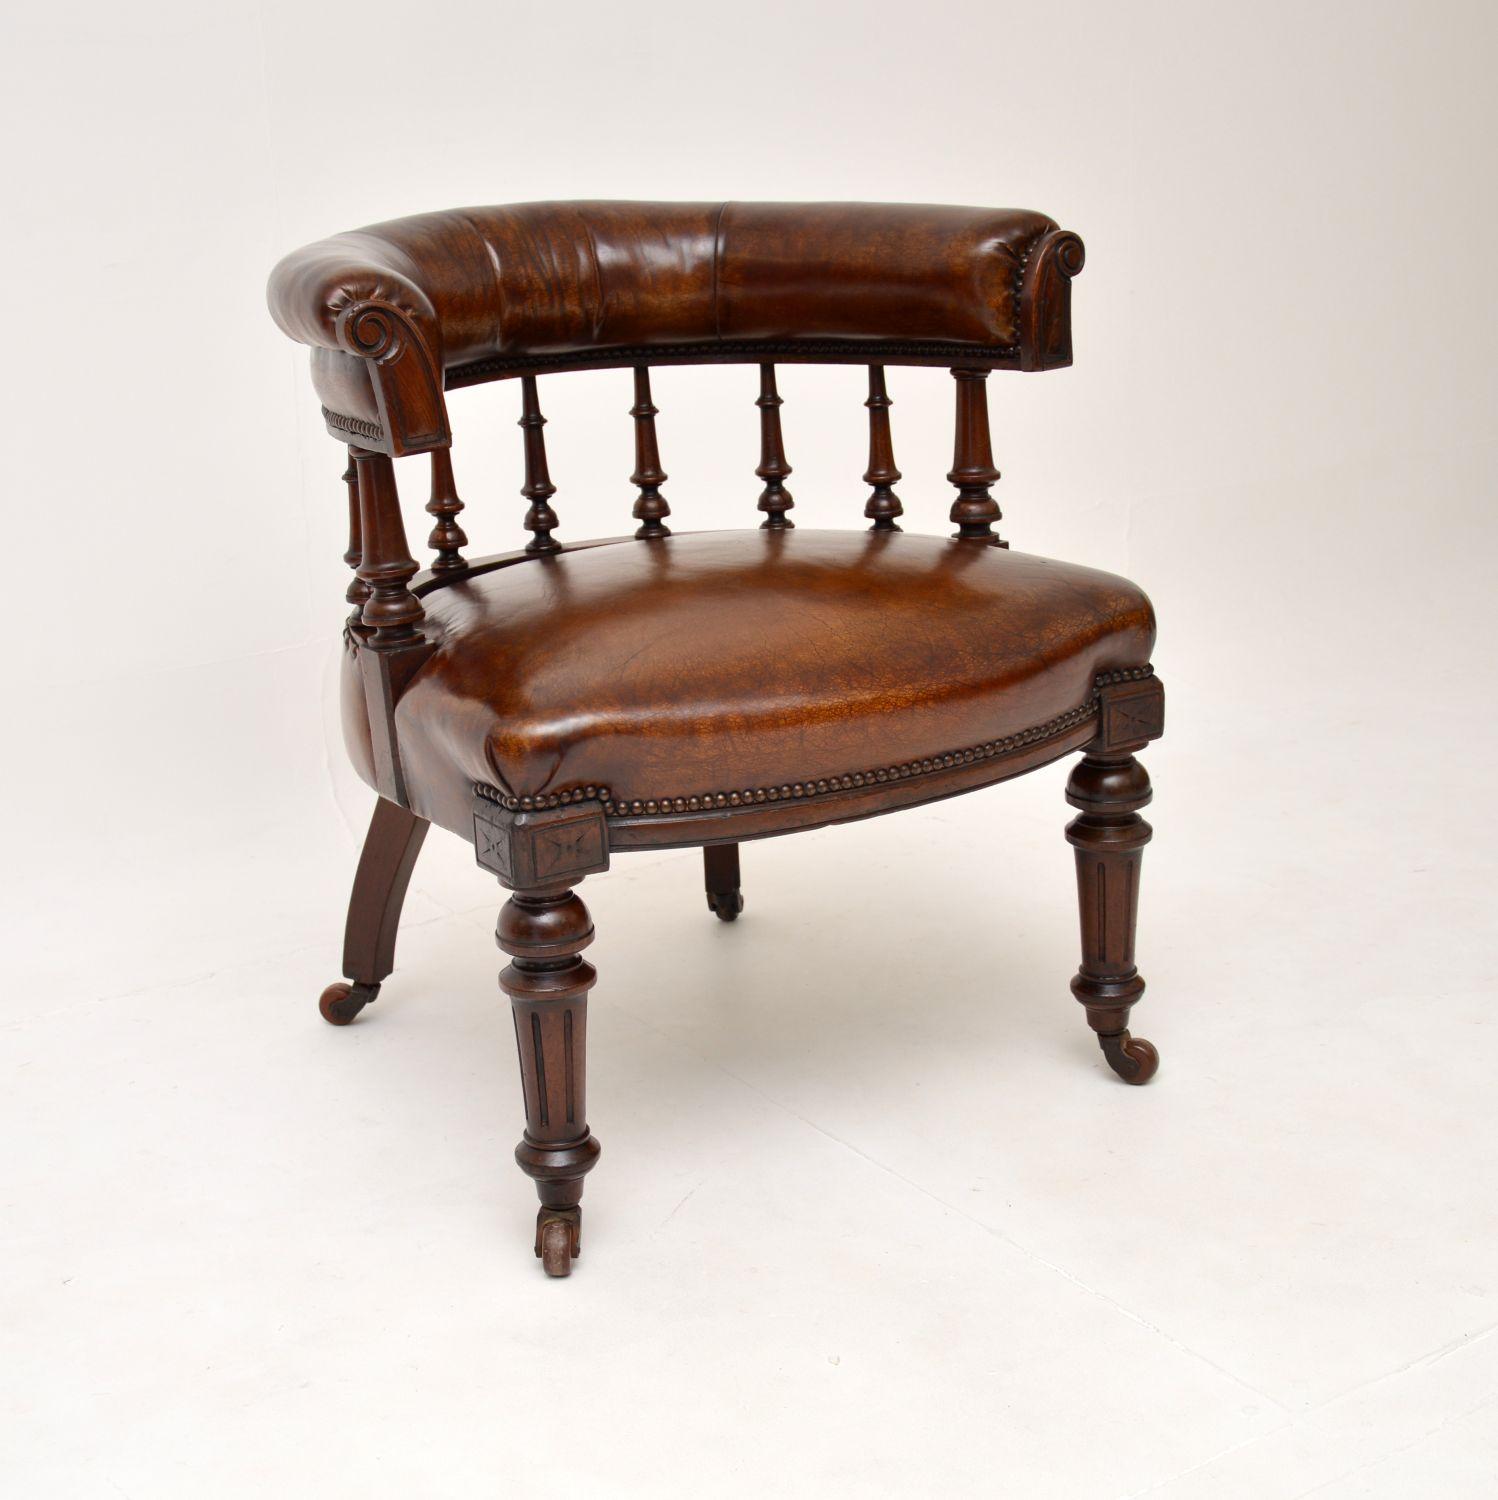 A fine antique early Victorian leather desk chair. This was made in England, it dates from around the 1840-1860 period.

It is extremely well made, with a beautifully carved frame. The legs and spindles on the back are nicely turned, the legs sit on